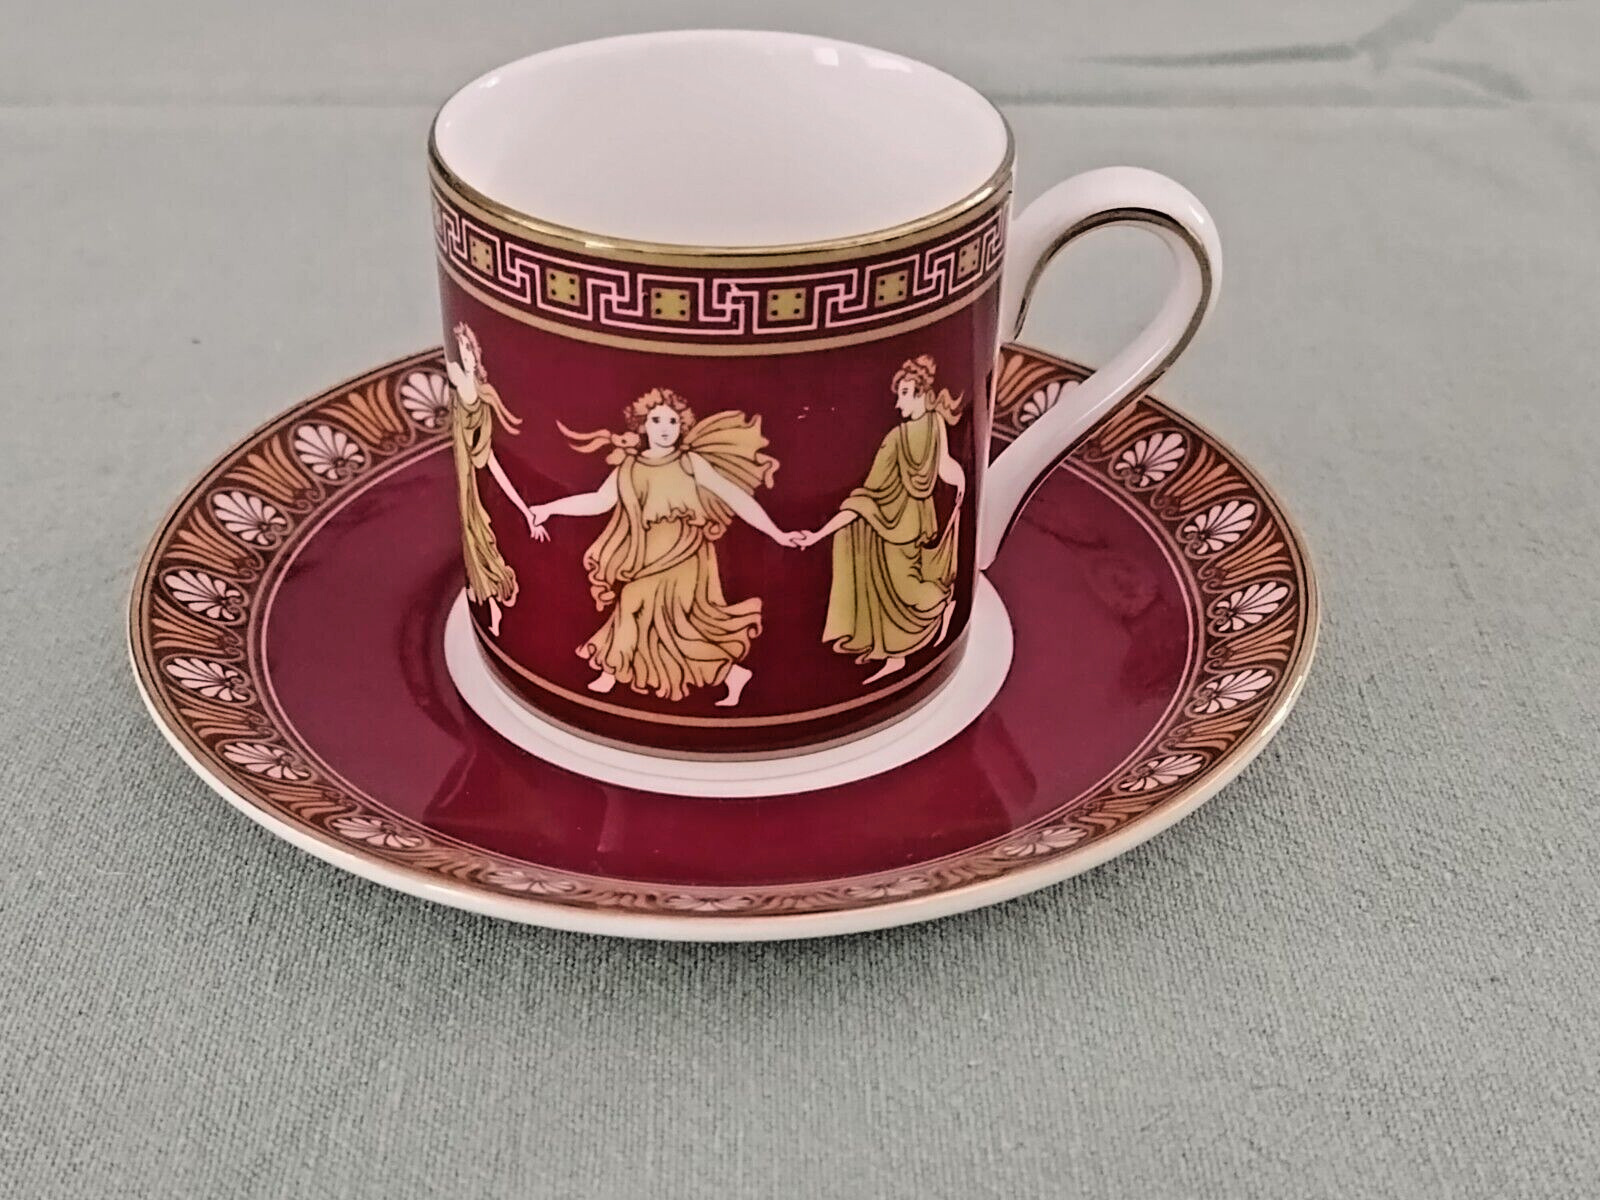 WEDGWOOD DANCING HOURS DEMITASSE CUP AND SAUCER